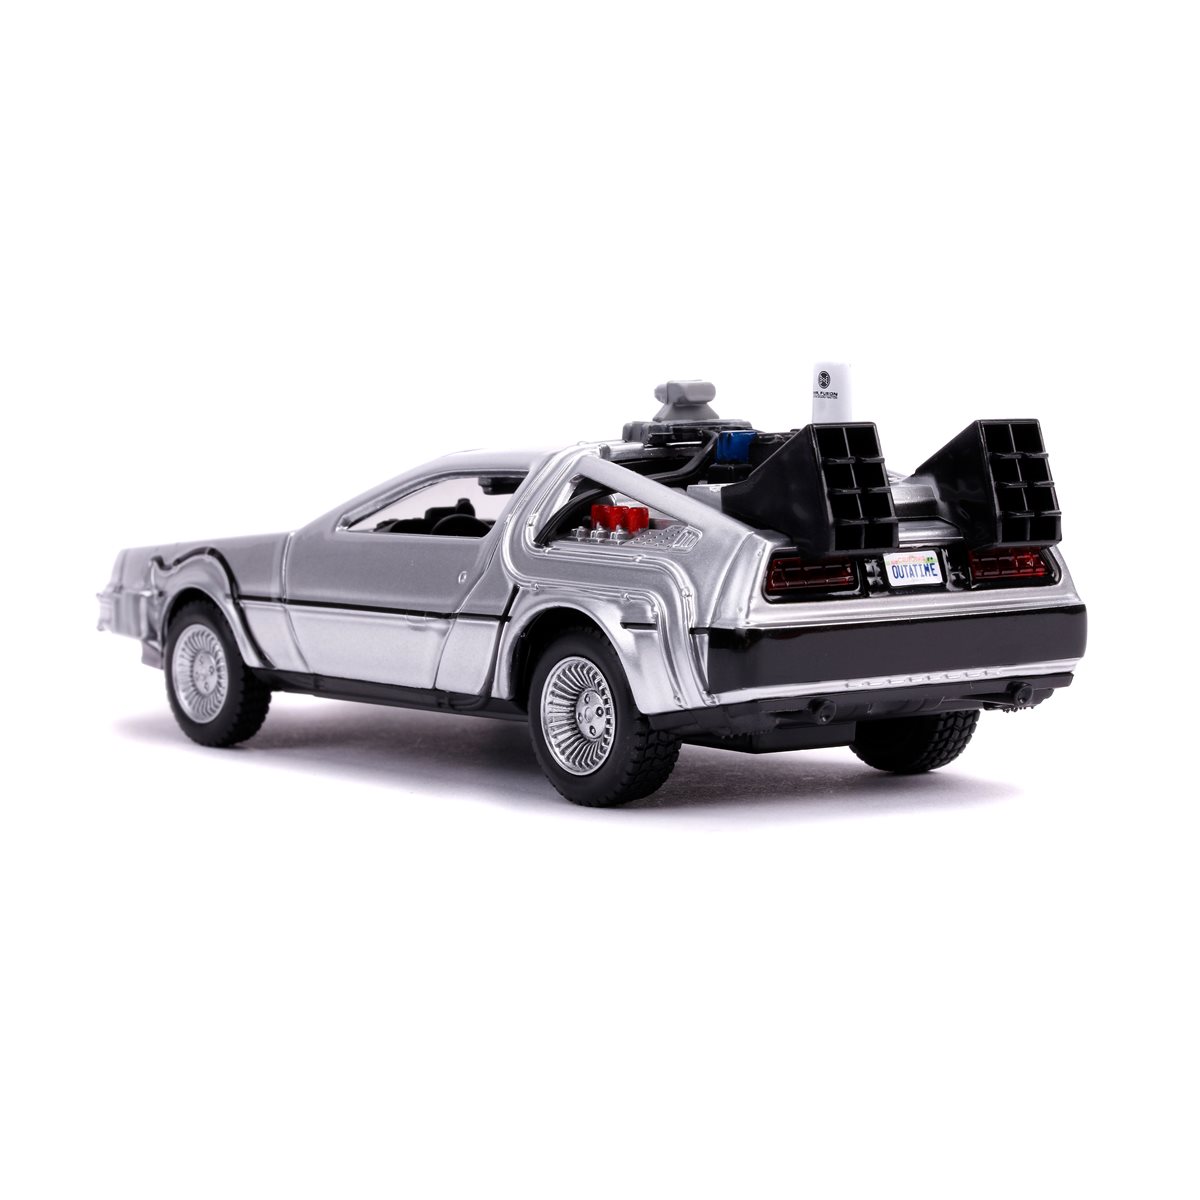 Back to the Future 2 Time Machine 1:32 Scale Die-Cast Metal Vehicle 